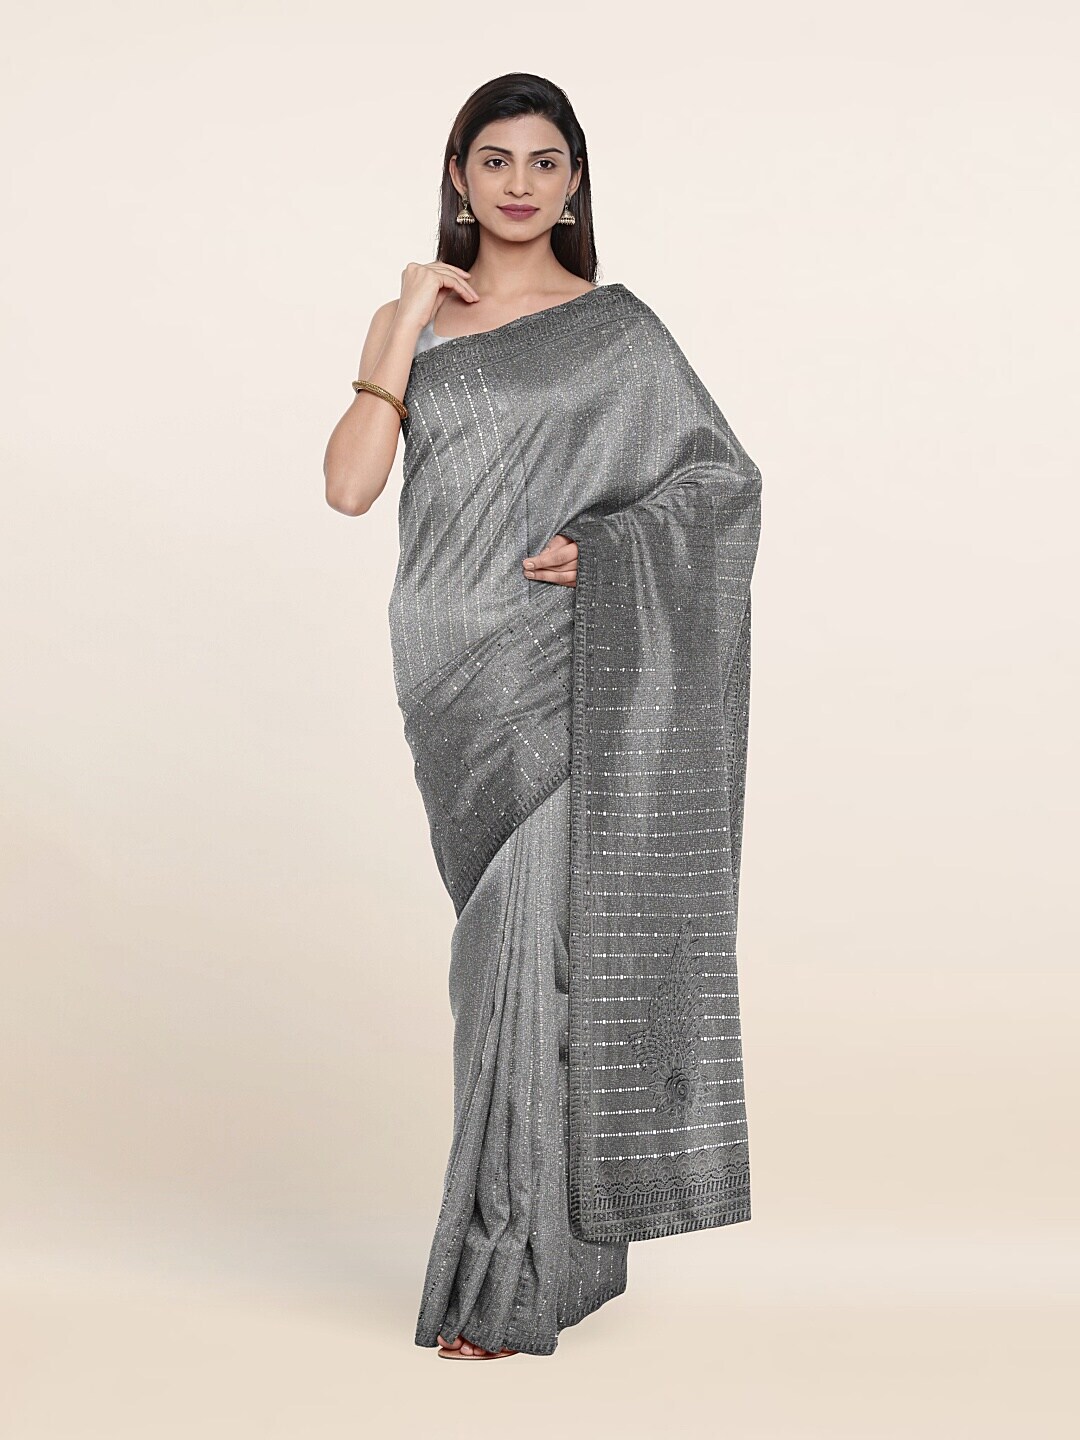 Pothys Grey & White Embellished Beads and Stones Saree Price in India